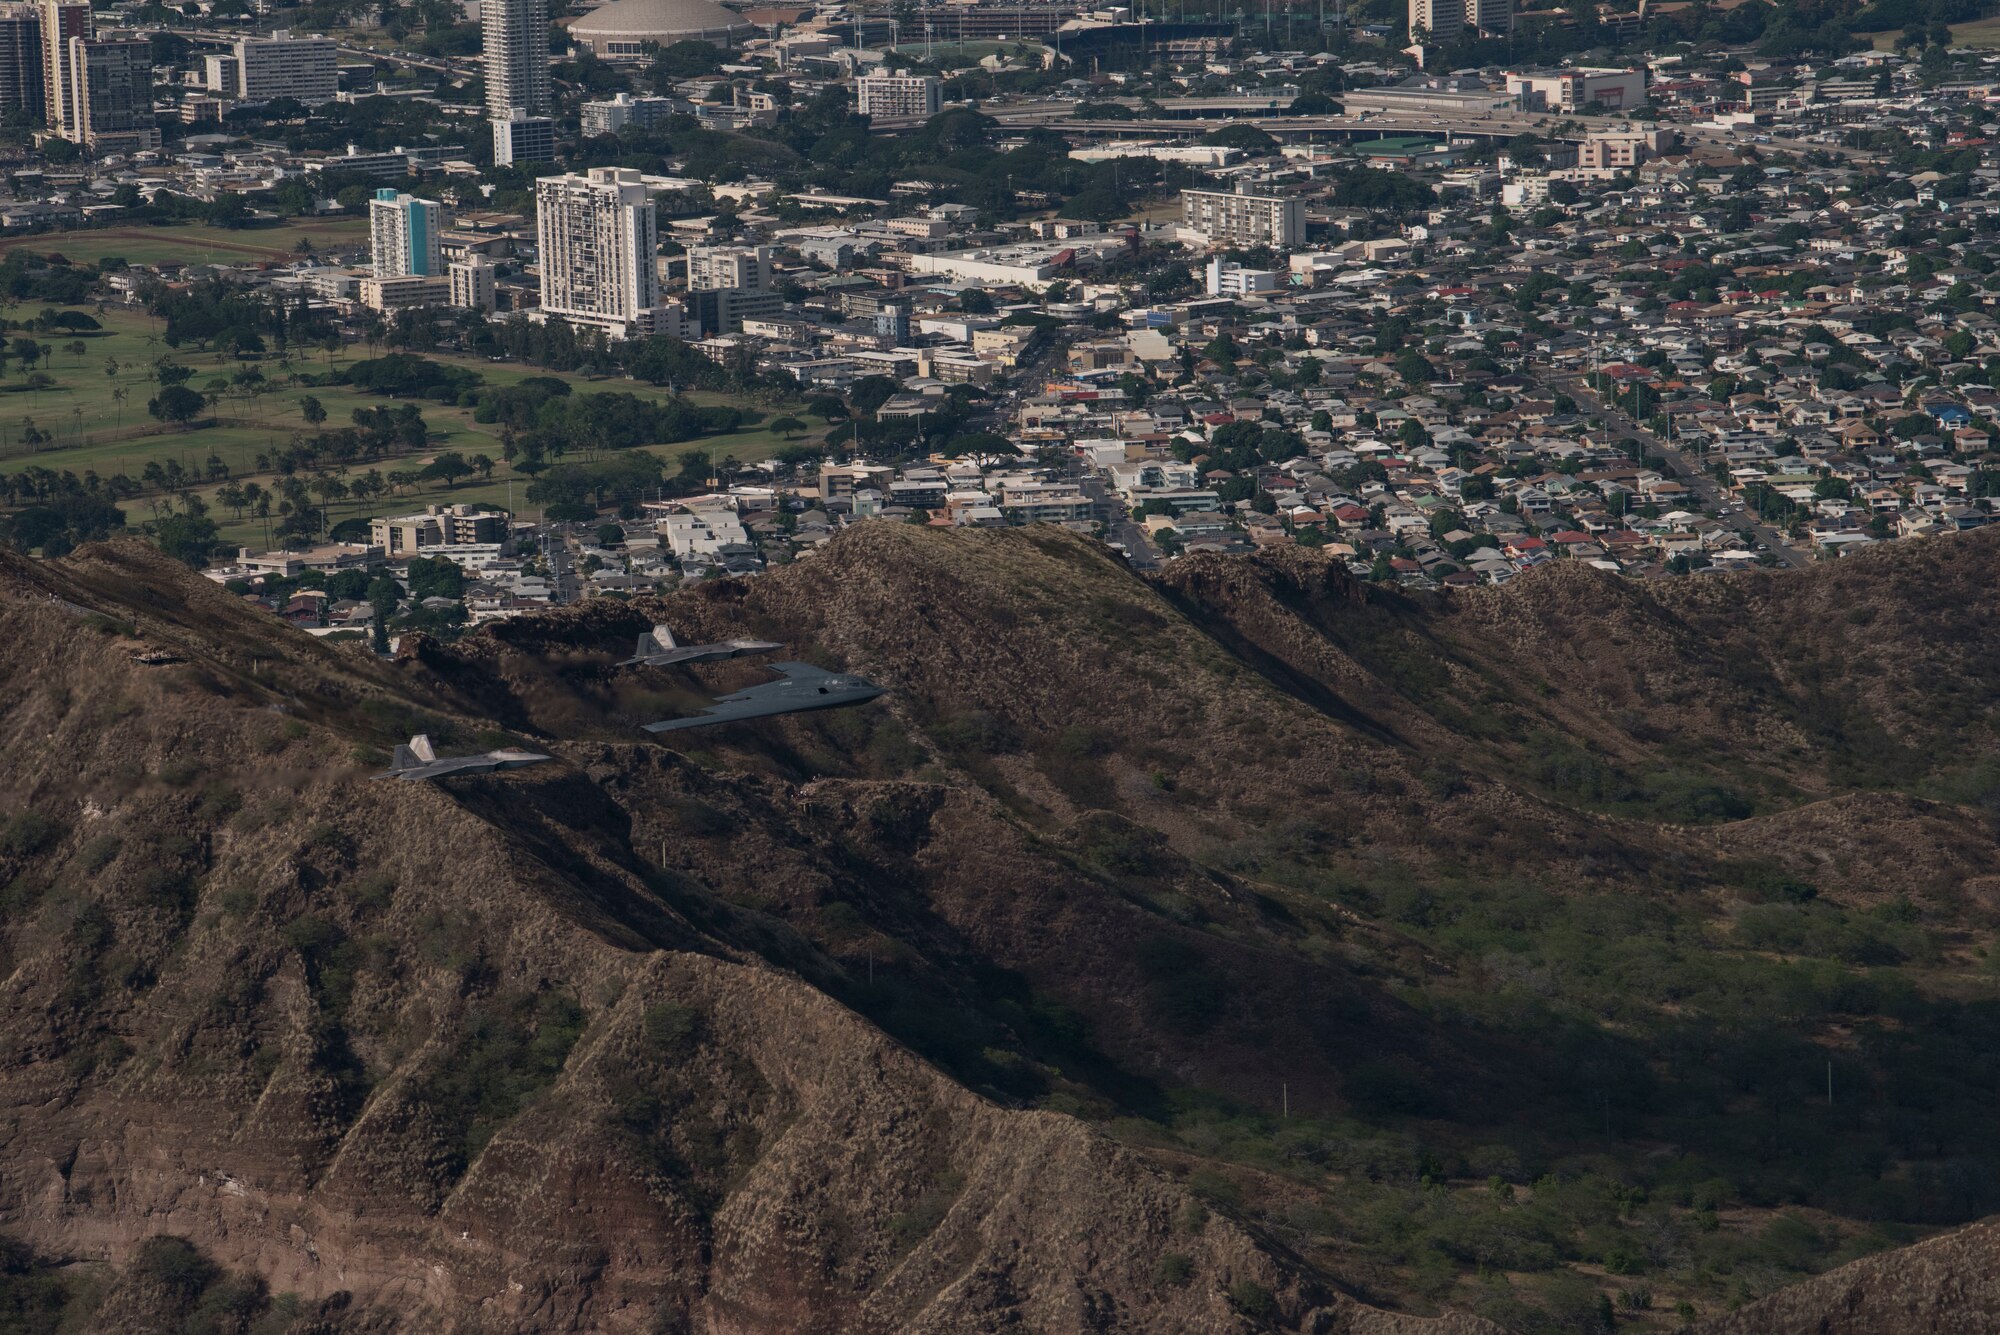 A U.S. Air Force B-2 Spirit bomber deployed from Whiteman Air Force Base, Missouri, and two F-22 Raptors from the 199th Fighter Squadron at Joint Base Pearl Harbor-Hickam, Hawaii, fly in formation near Diamond Head State Monument, Hawaii, Jan. 15, 2019.